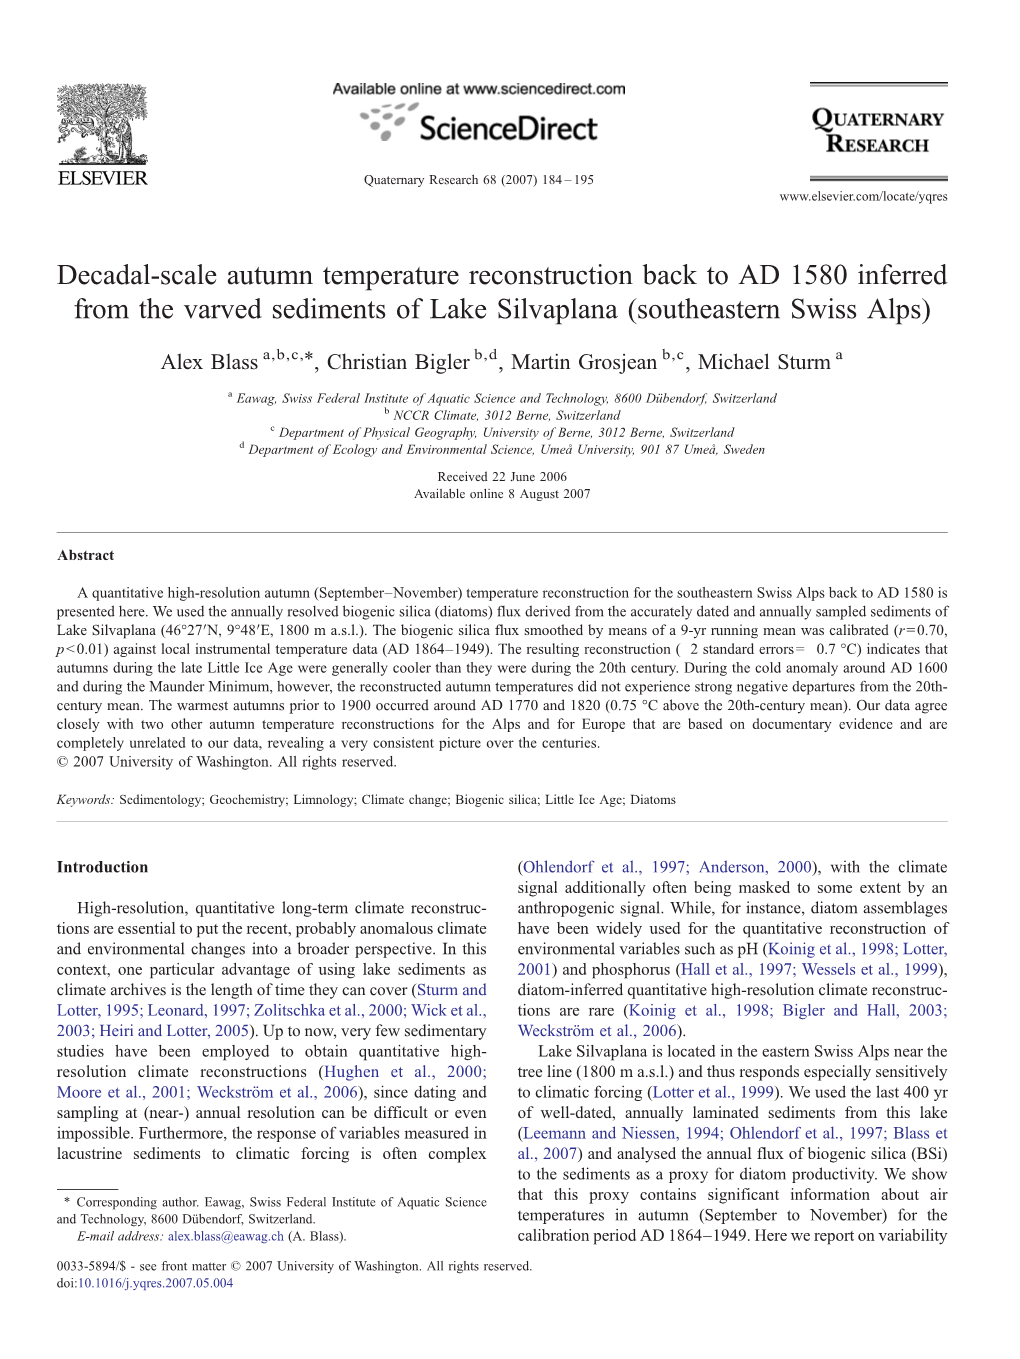 Decadal-Scale Autumn Temperature Reconstruction Back to AD 1580 Inferred from the Varved Sediments of Lake Silvaplana